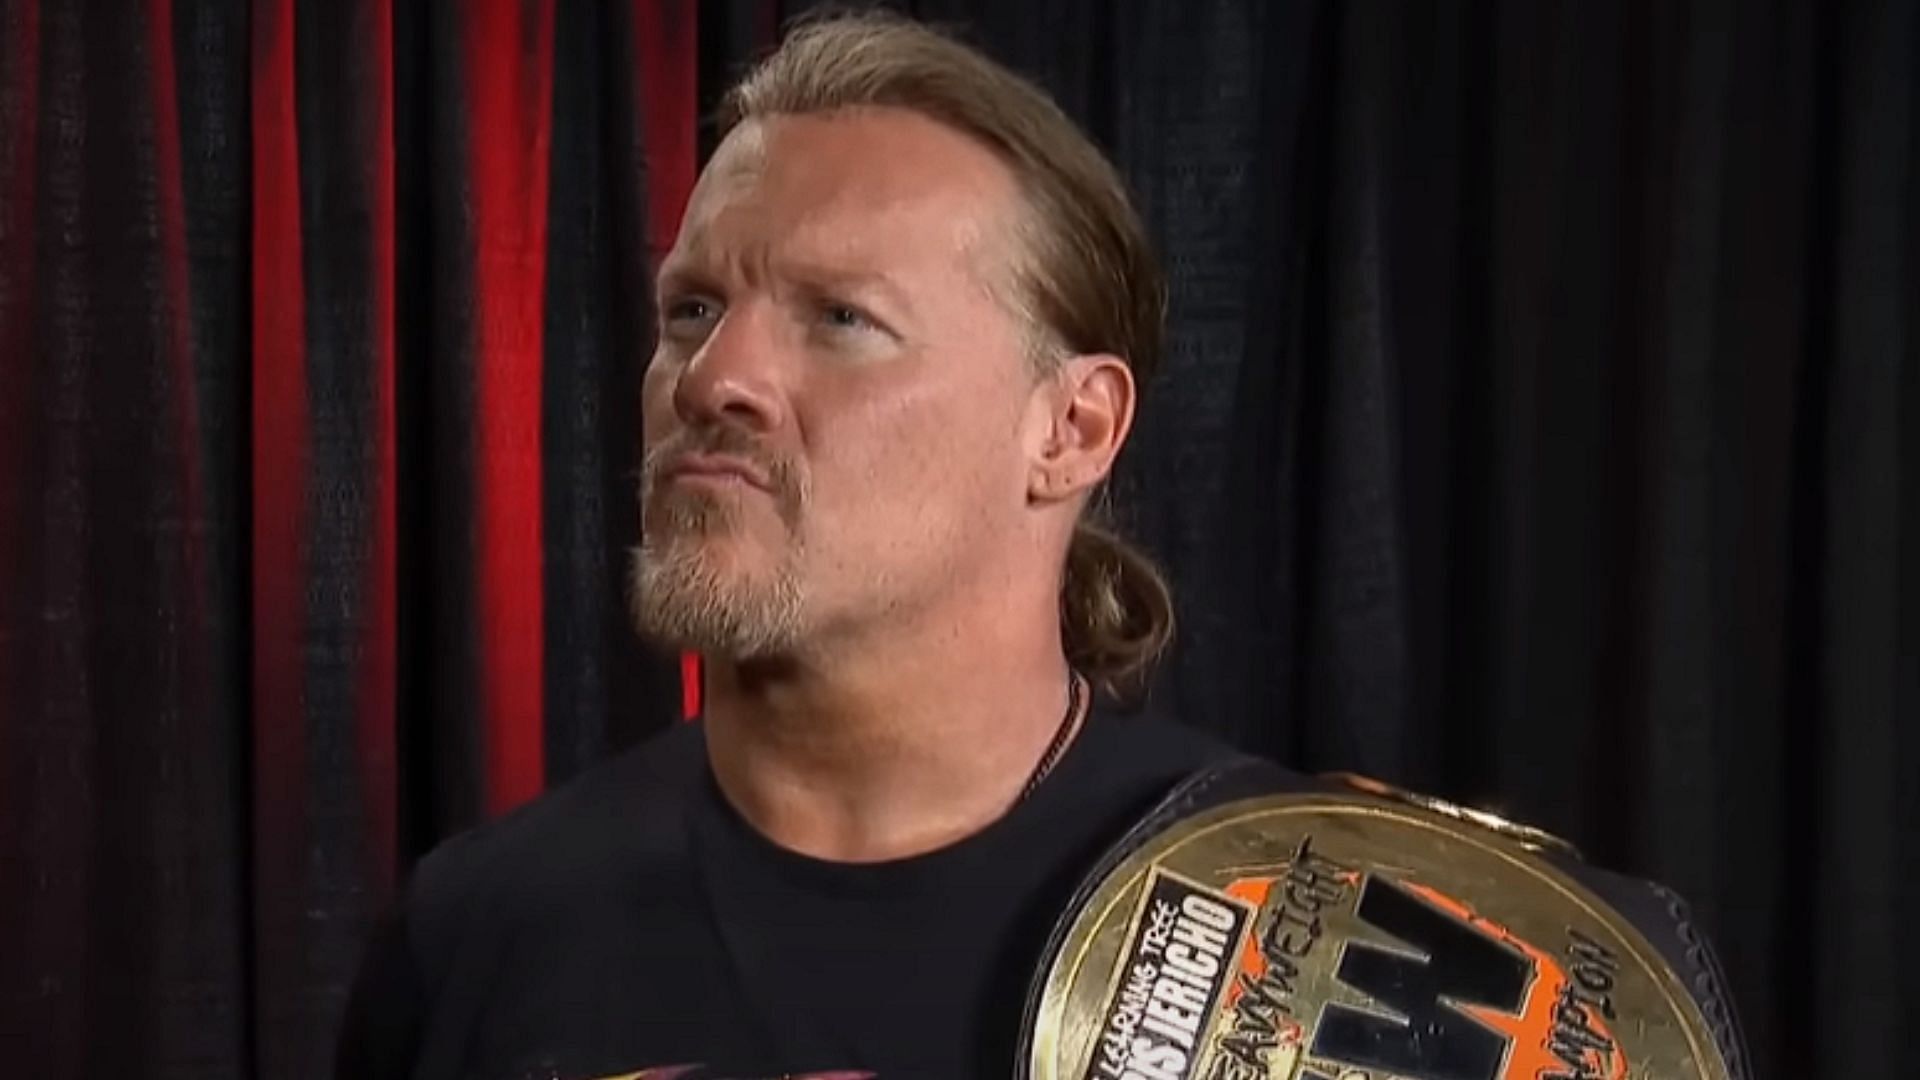 Chris Jericho is a former AEW World Champion [Photo courtesy of AEW